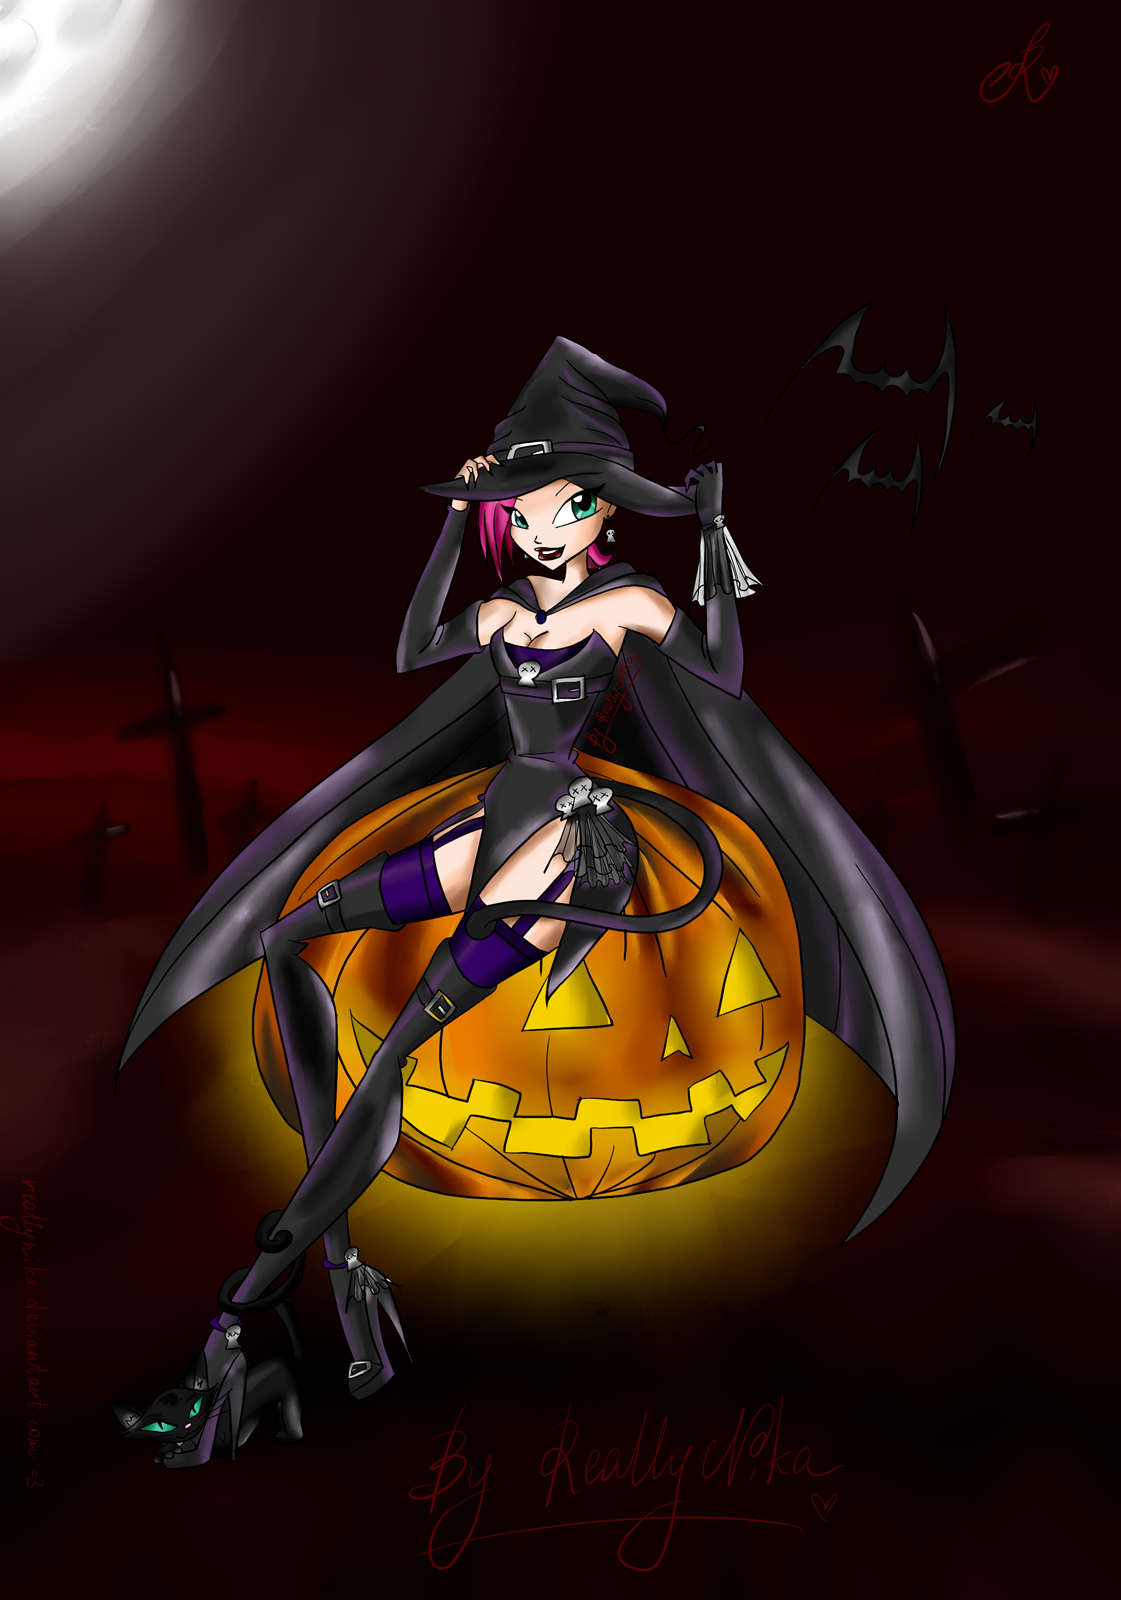 http://www.youloveit.ru/uploads/gallery/main/126/happy_halloween_tecna_by_reall.png